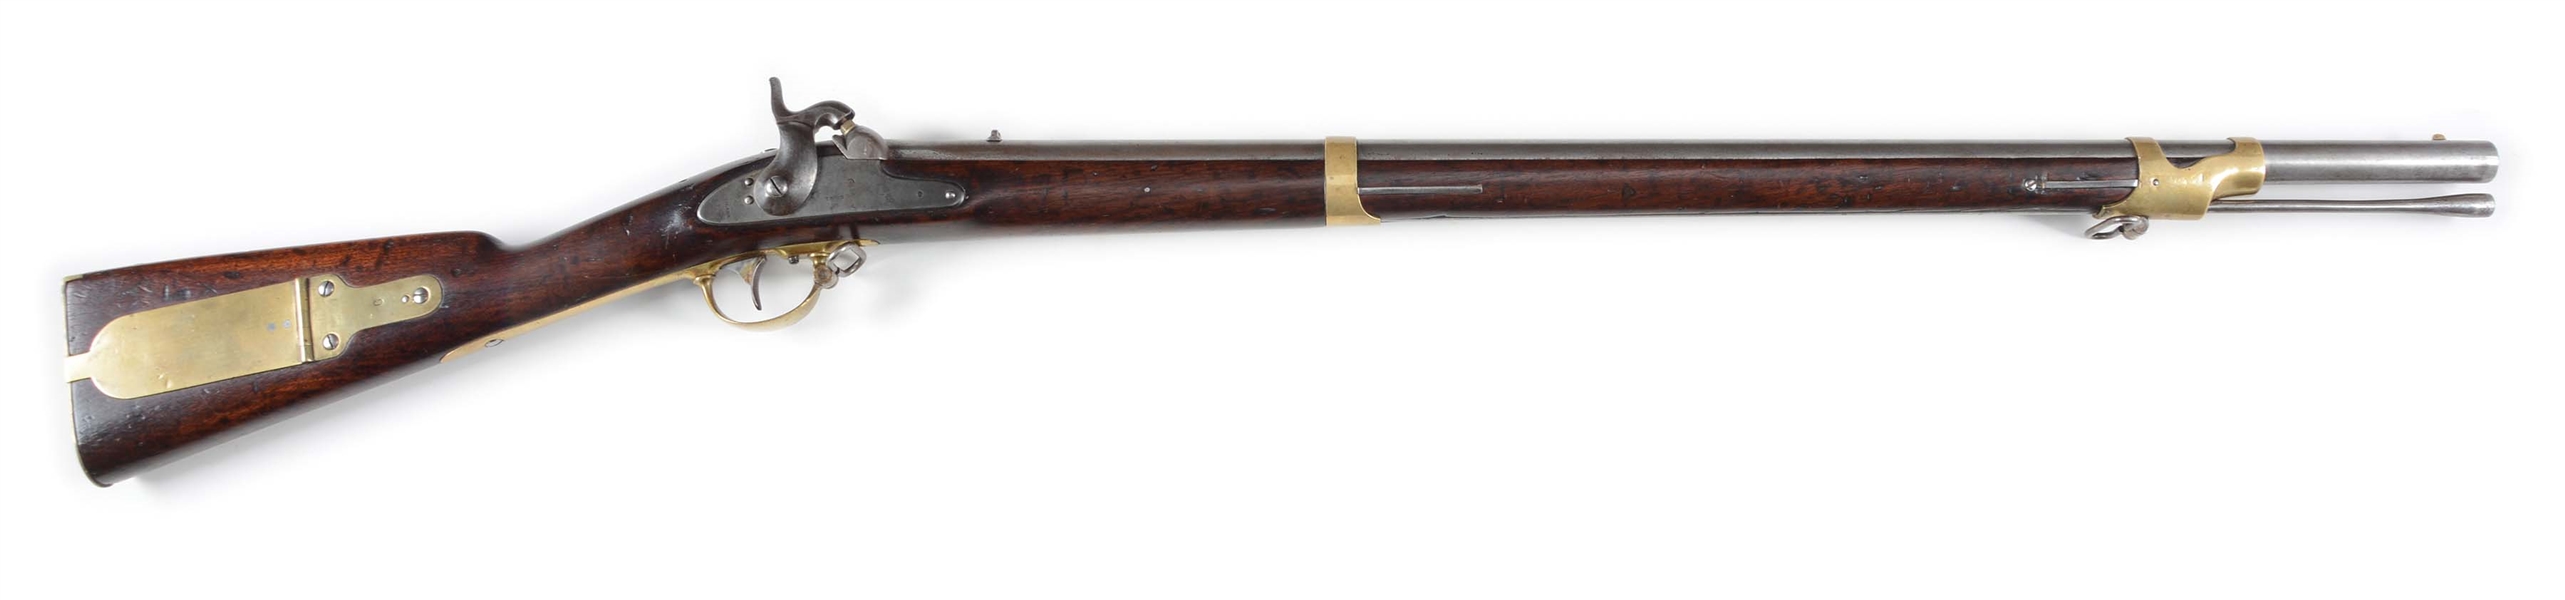 (A) SCARCE MODEL 1841 "MISSISSIPPI" PERCUSSION RIFLE BY TRYON.